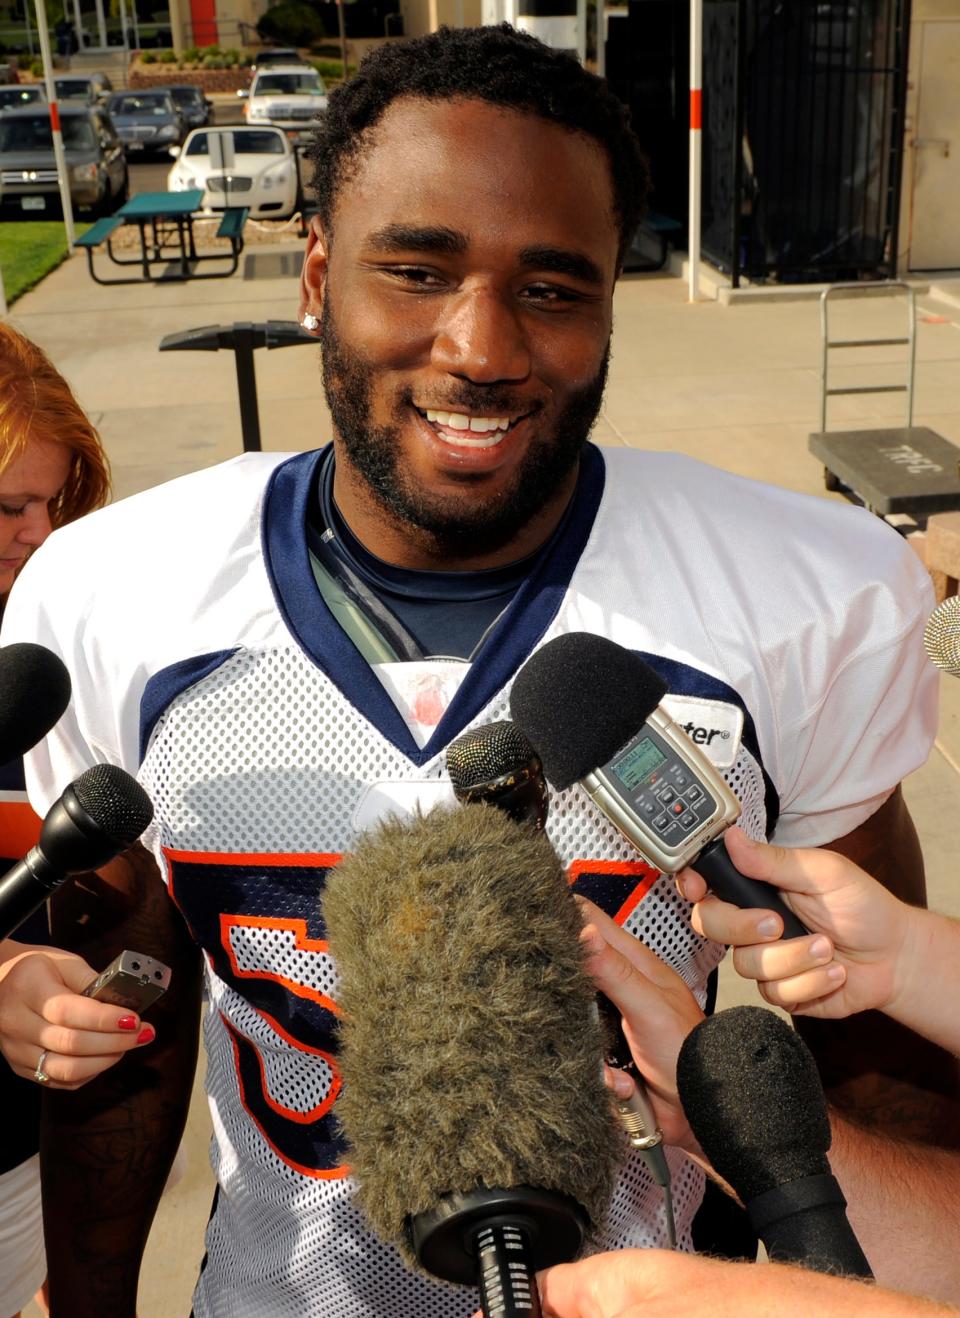 Robert Ayers, shown while playing for the Denver Broncos in 2011, has been hired as a defensive graduate assistant at Tennessee, his alma mater. Ayers has spent the past three seasons coaching at the high school level at Knoxville Catholic and Oak Ridge